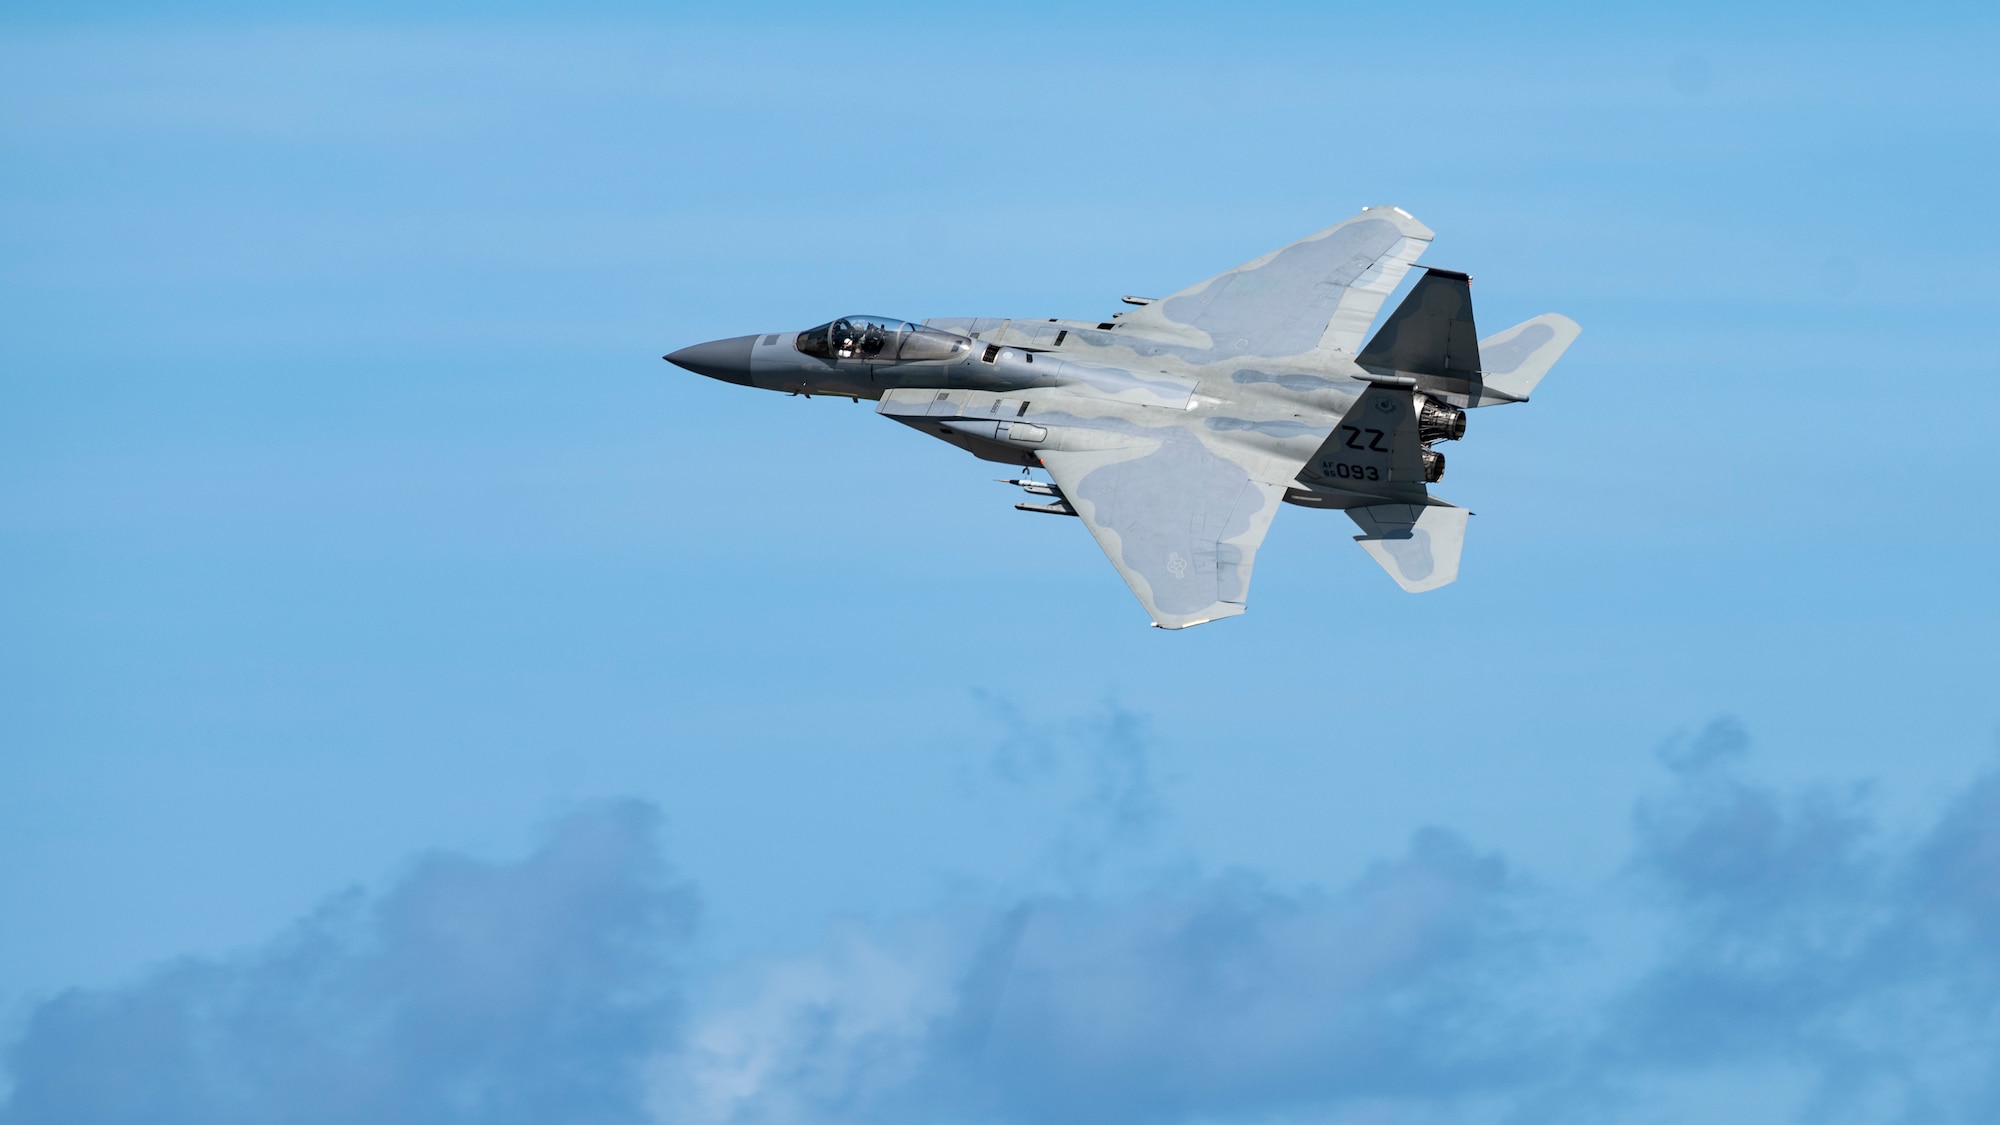 An F-15C Eagle assigned to the 44th Fighter Squadron flies overhead in support of surge operations at Kadena Air Base, Japan, Aug. 23, 2022. Surge operations provide aircrew and support personnel the opportunity to train the skills necessary to maintain a ready force, capable of ensuring the collective defense of the Indo-Pacific region. (U.S. Air Force photo by Senior Airman Jessi Roth)